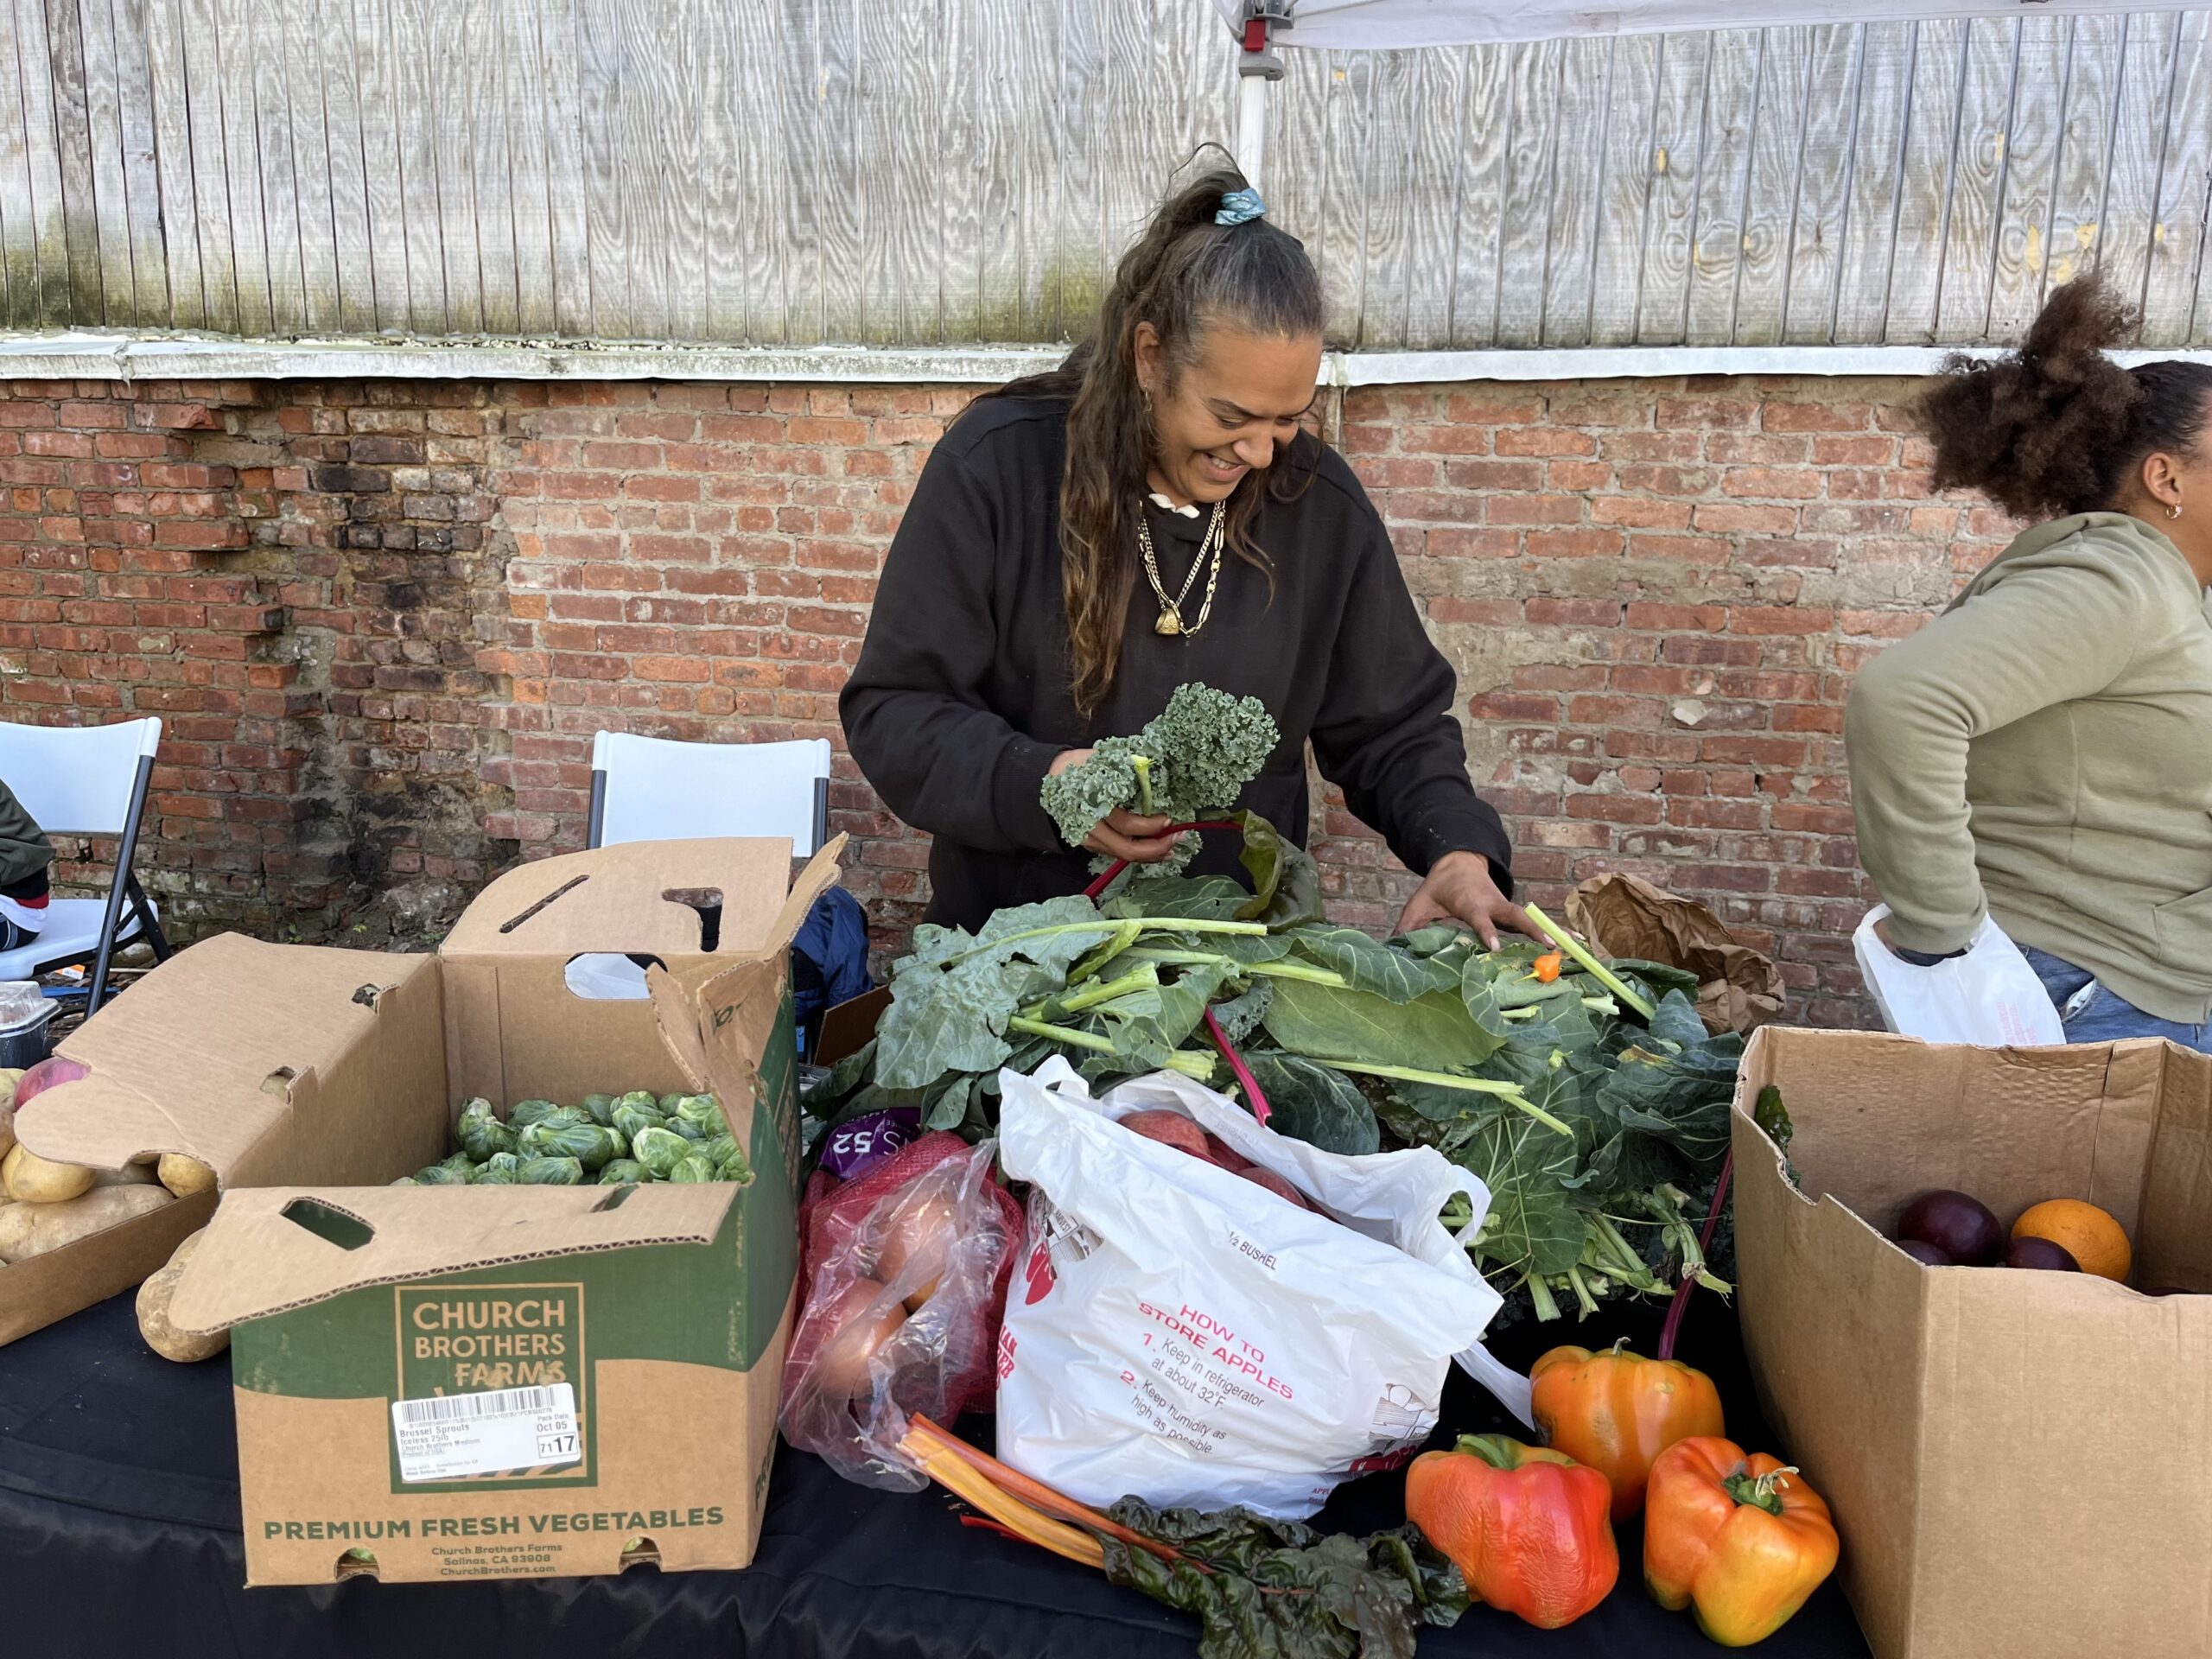 West Hill is a food desert. This market works to change that.